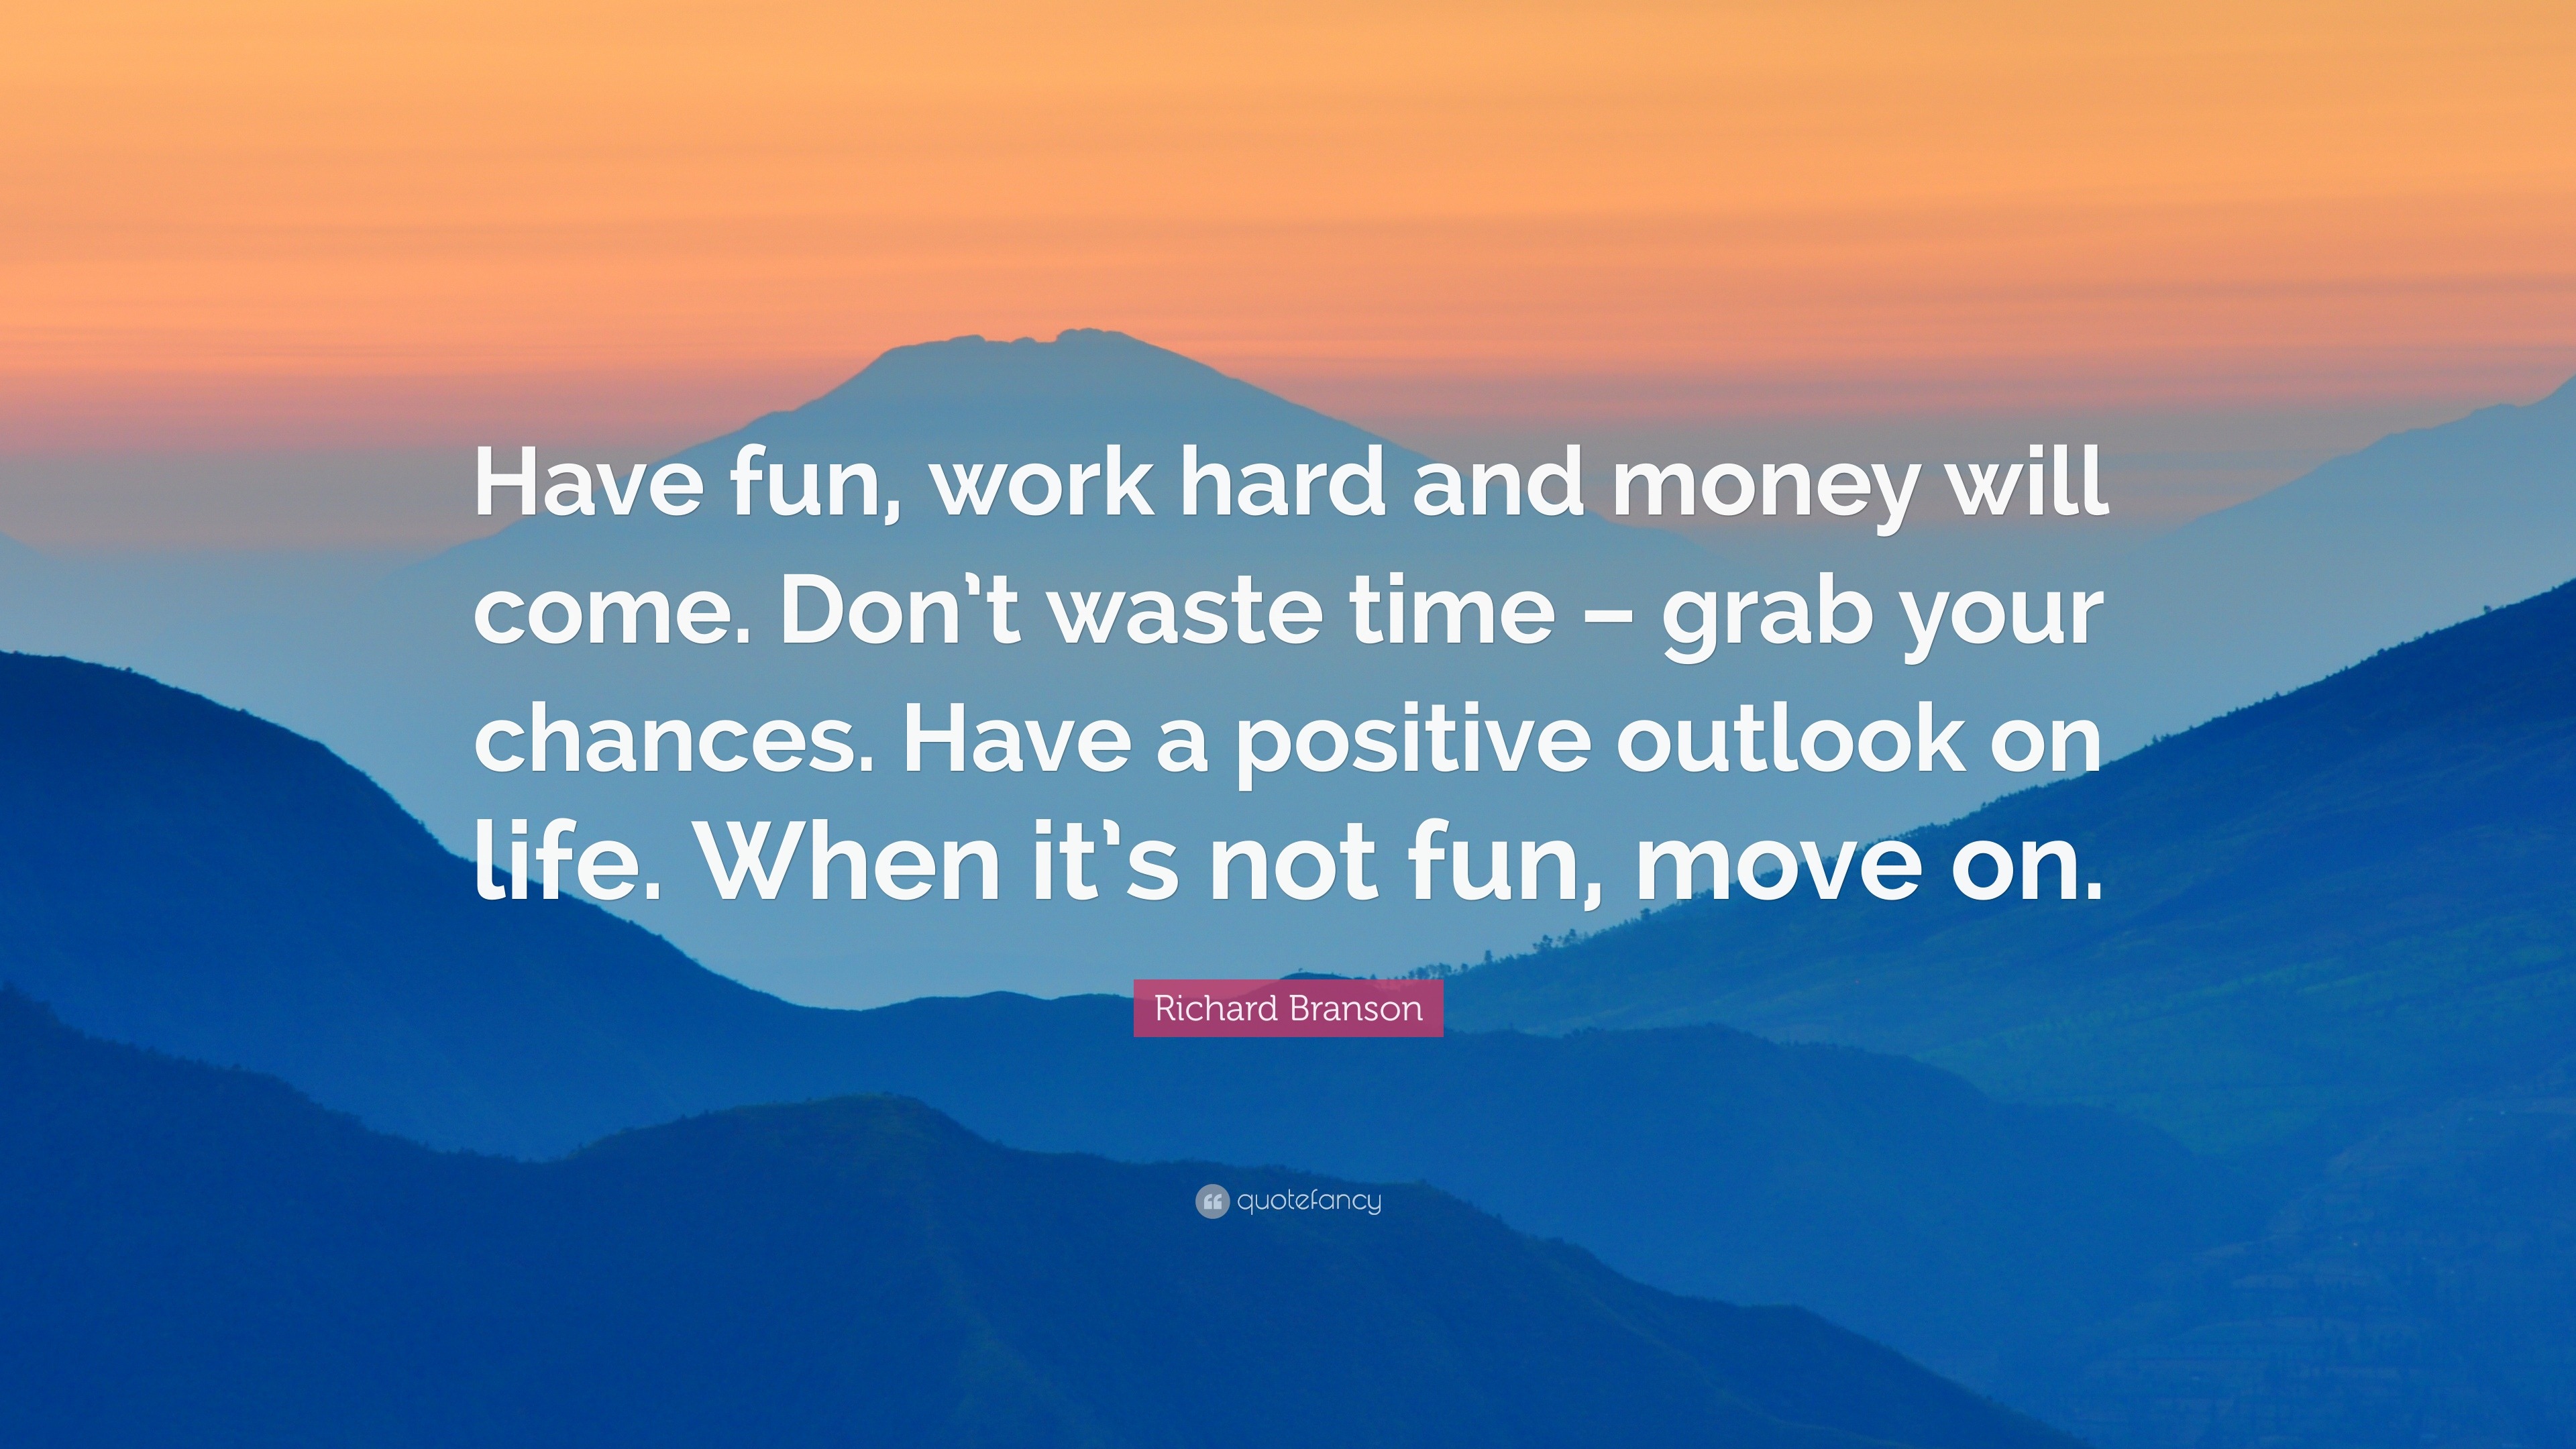 Richard Branson Quote “Have fun work hard and money will e Don